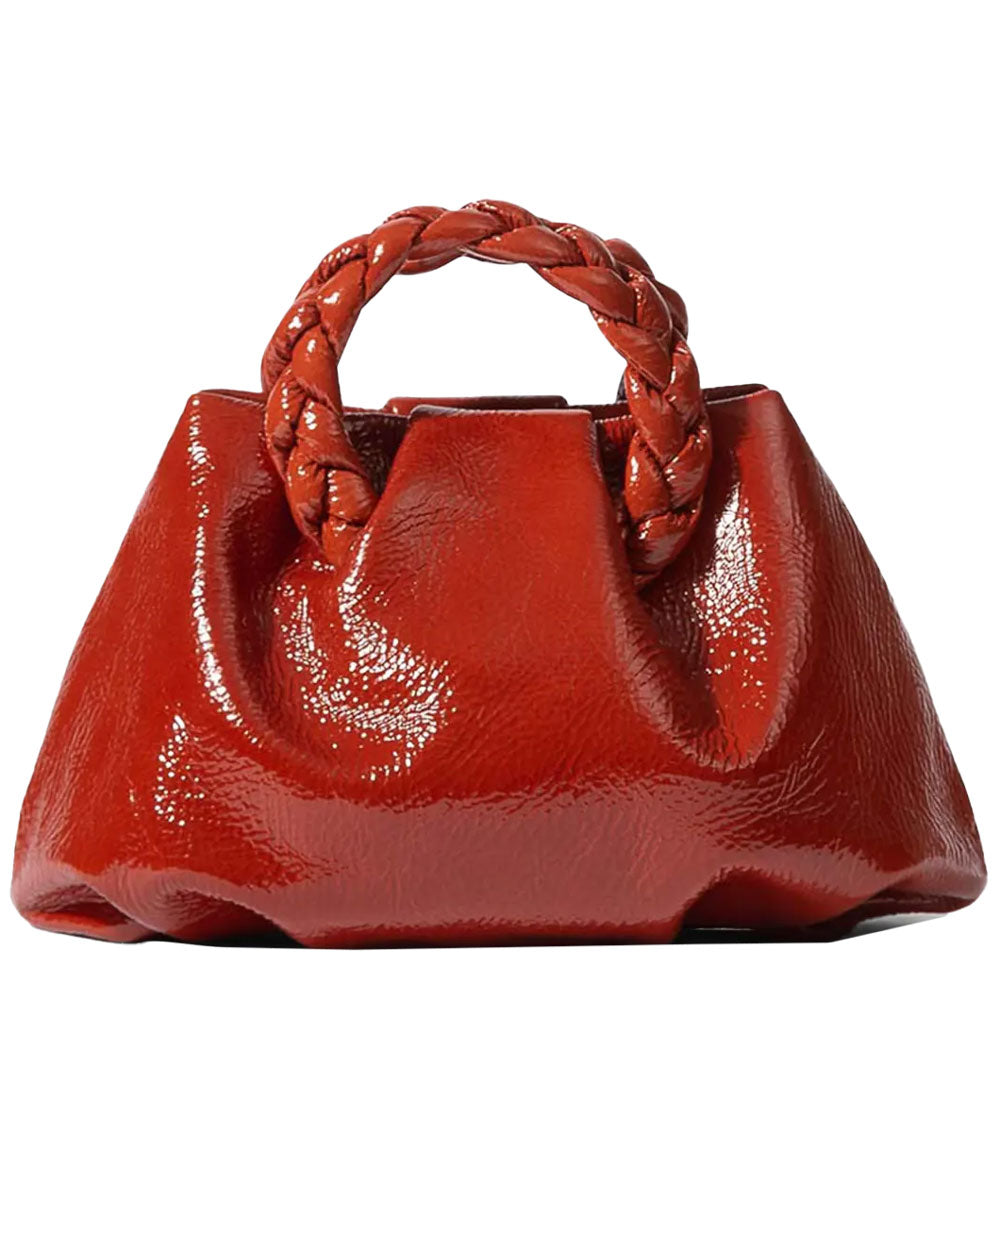 Bombon Crinkled Glossy Top Handle Bag in Red